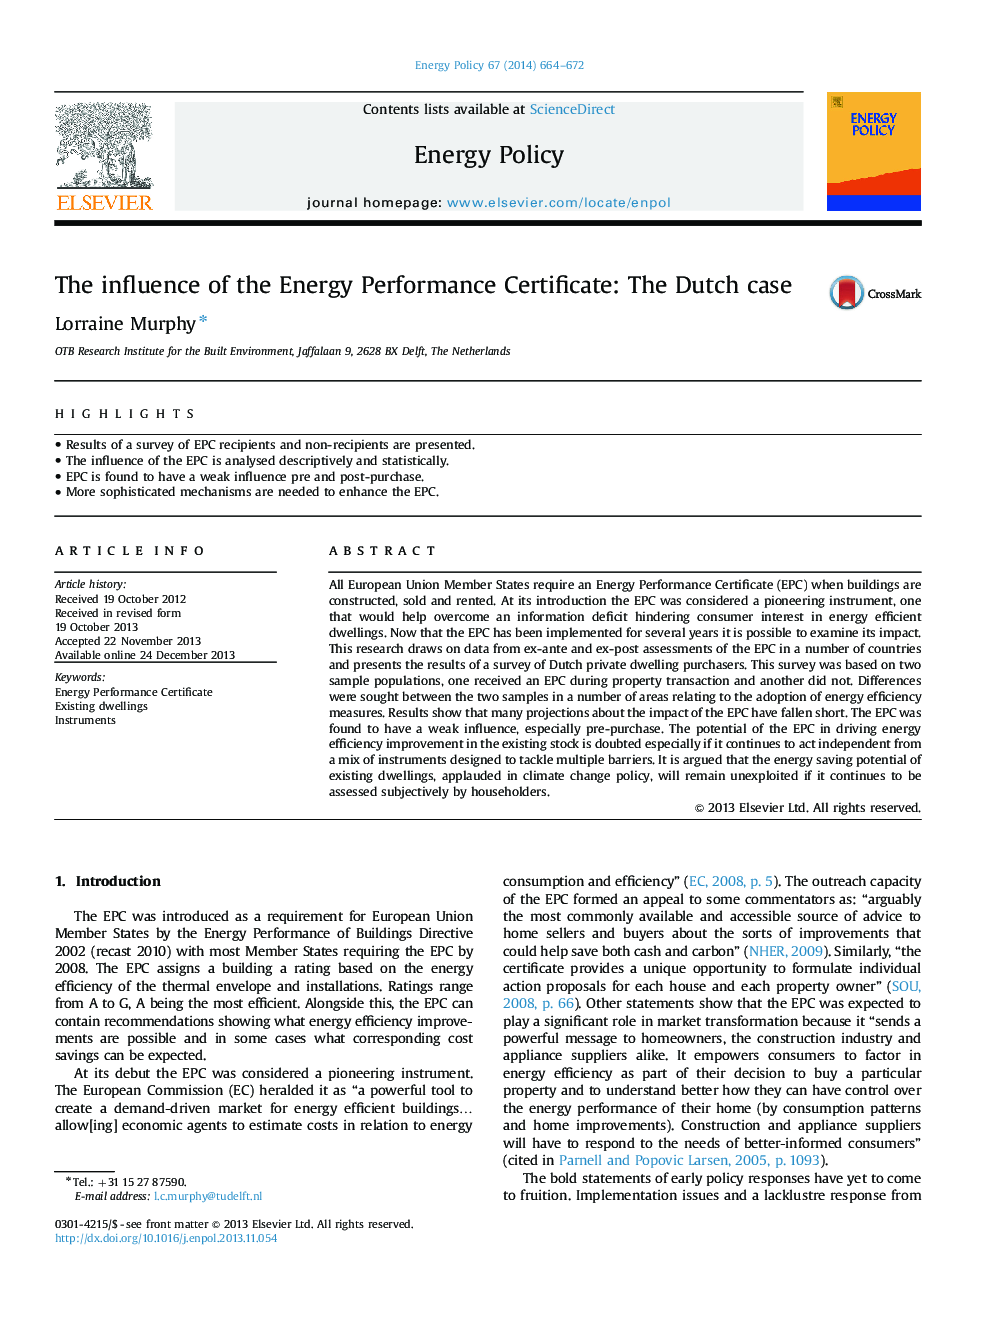 The influence of the Energy Performance Certificate: The Dutch case